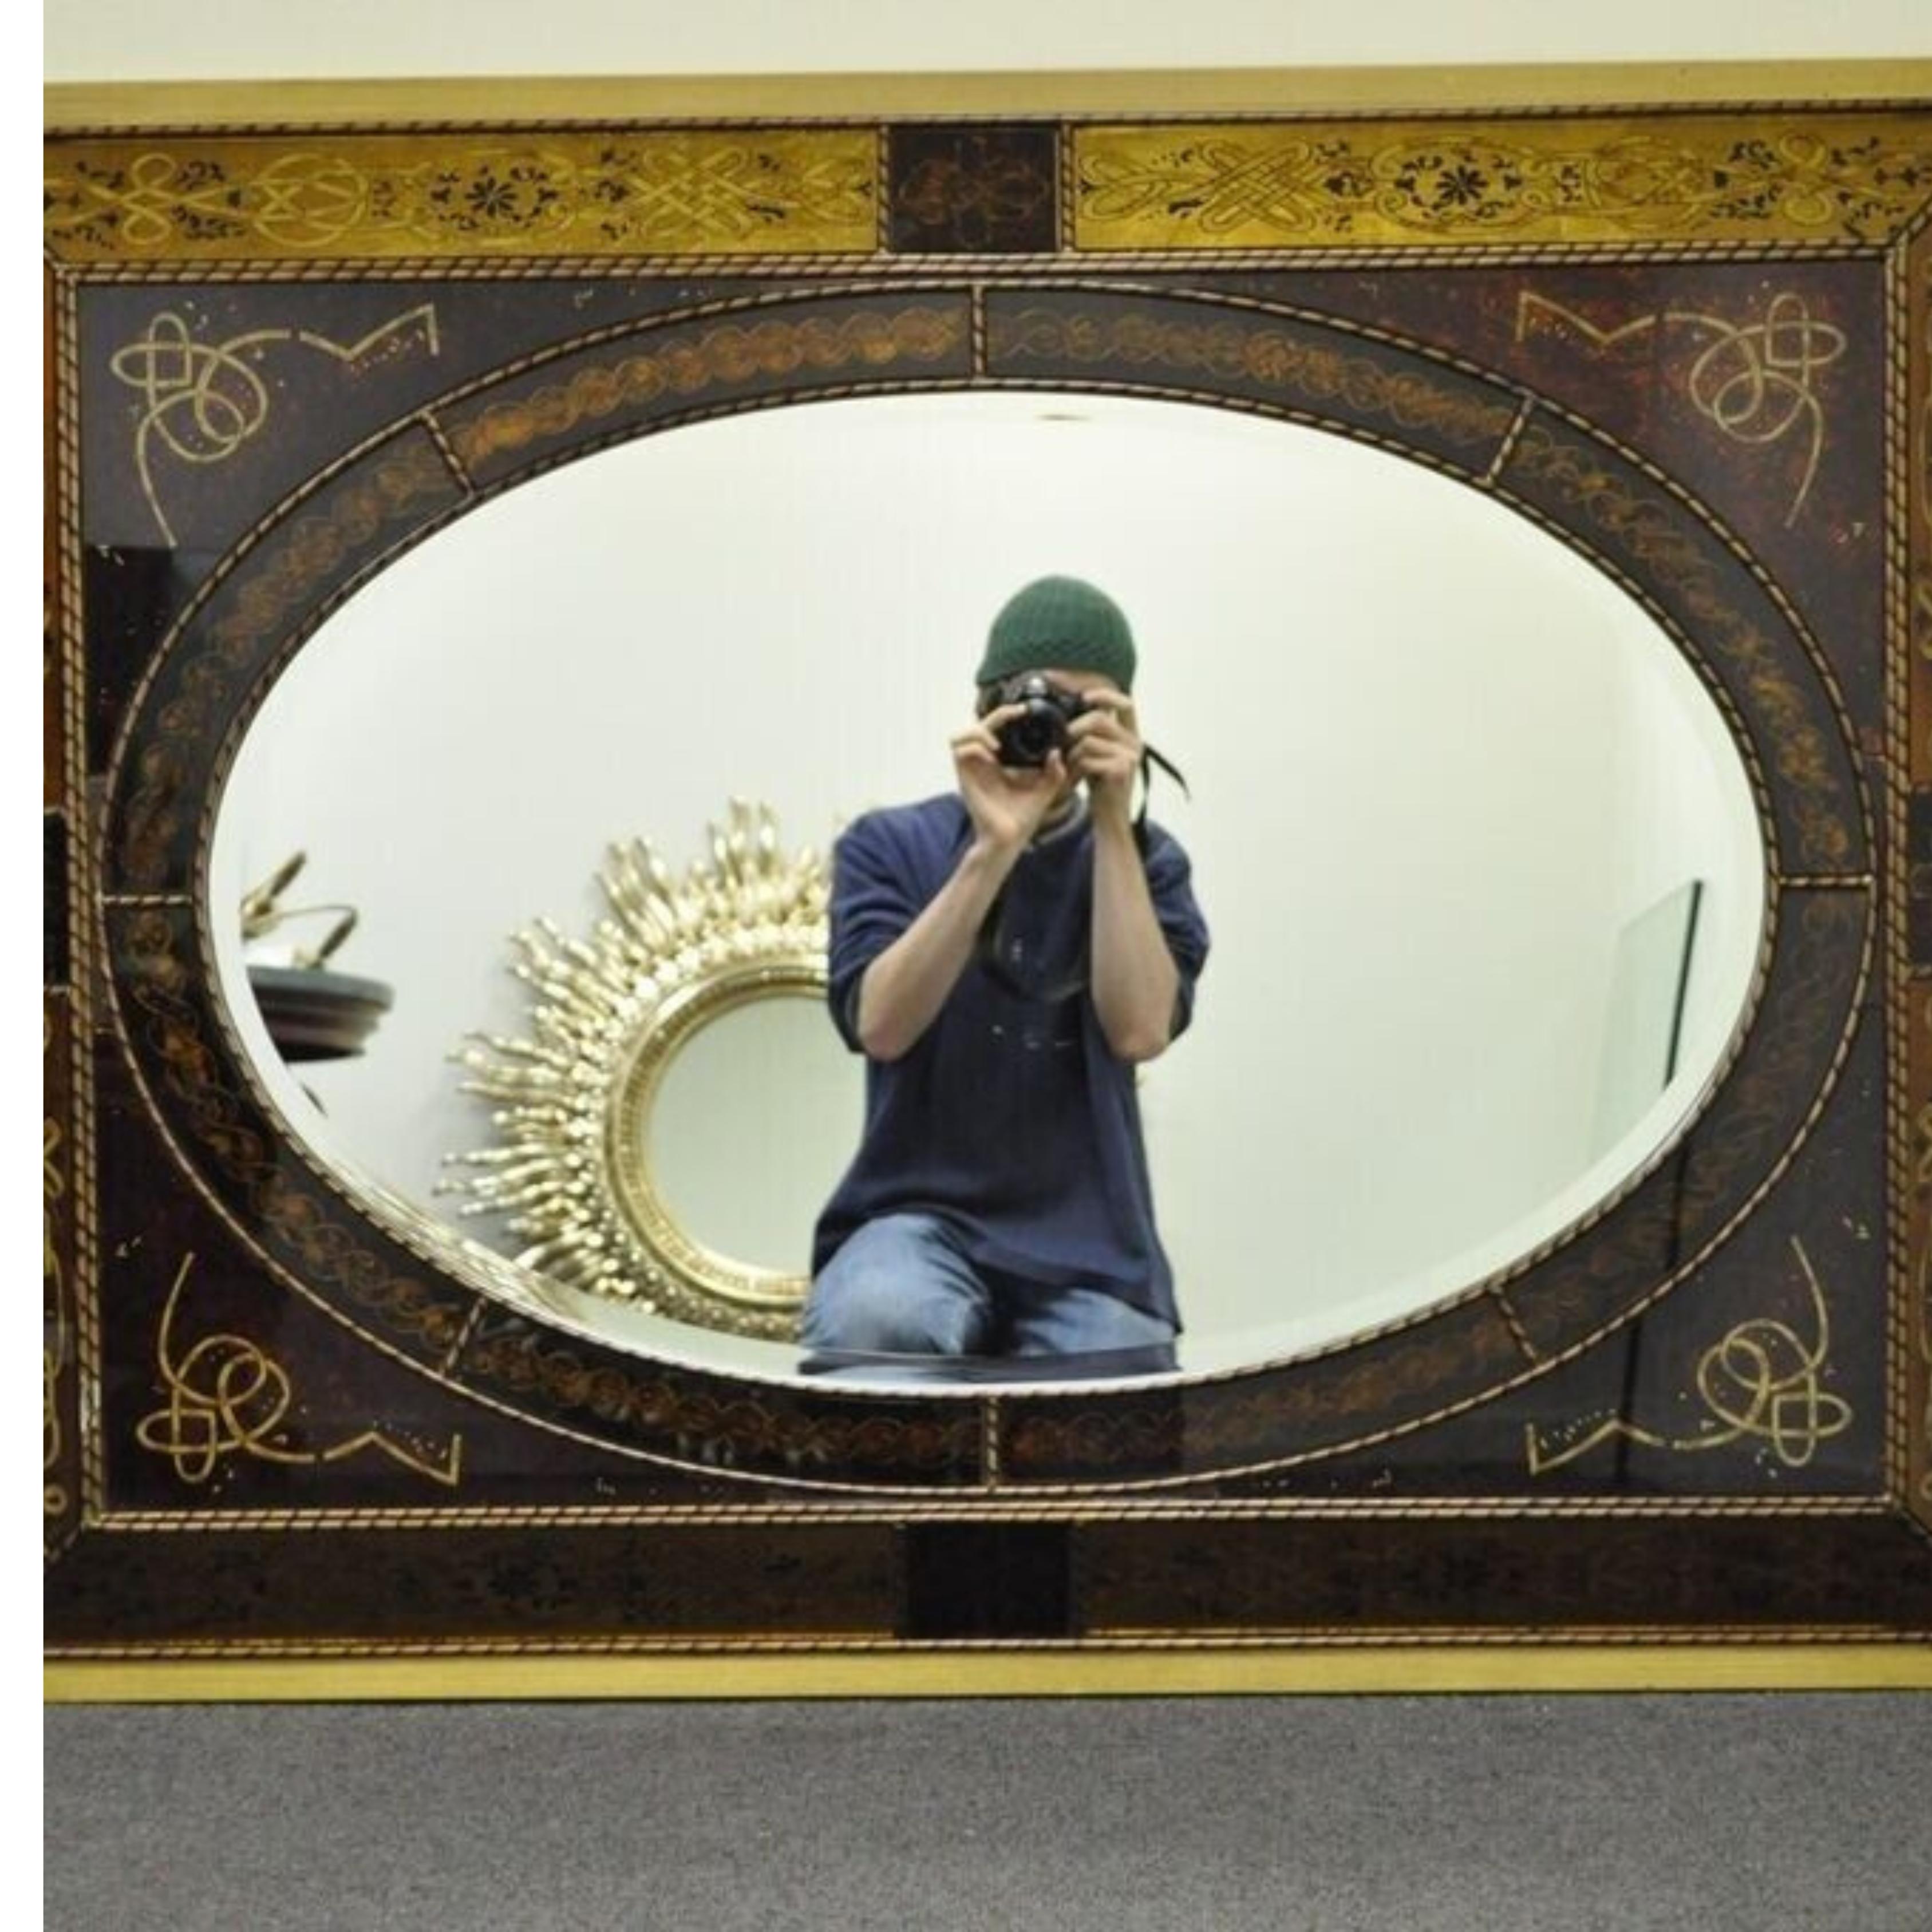 Decorator Italian Venetian Style Hollywood Regency Reverse Decorated Wall Mirror Item features a wood frame with beveled oval mirror, reverse decorated glass with scrolling knotwork and floral motifs, can hang vertically or horizontally. 21st